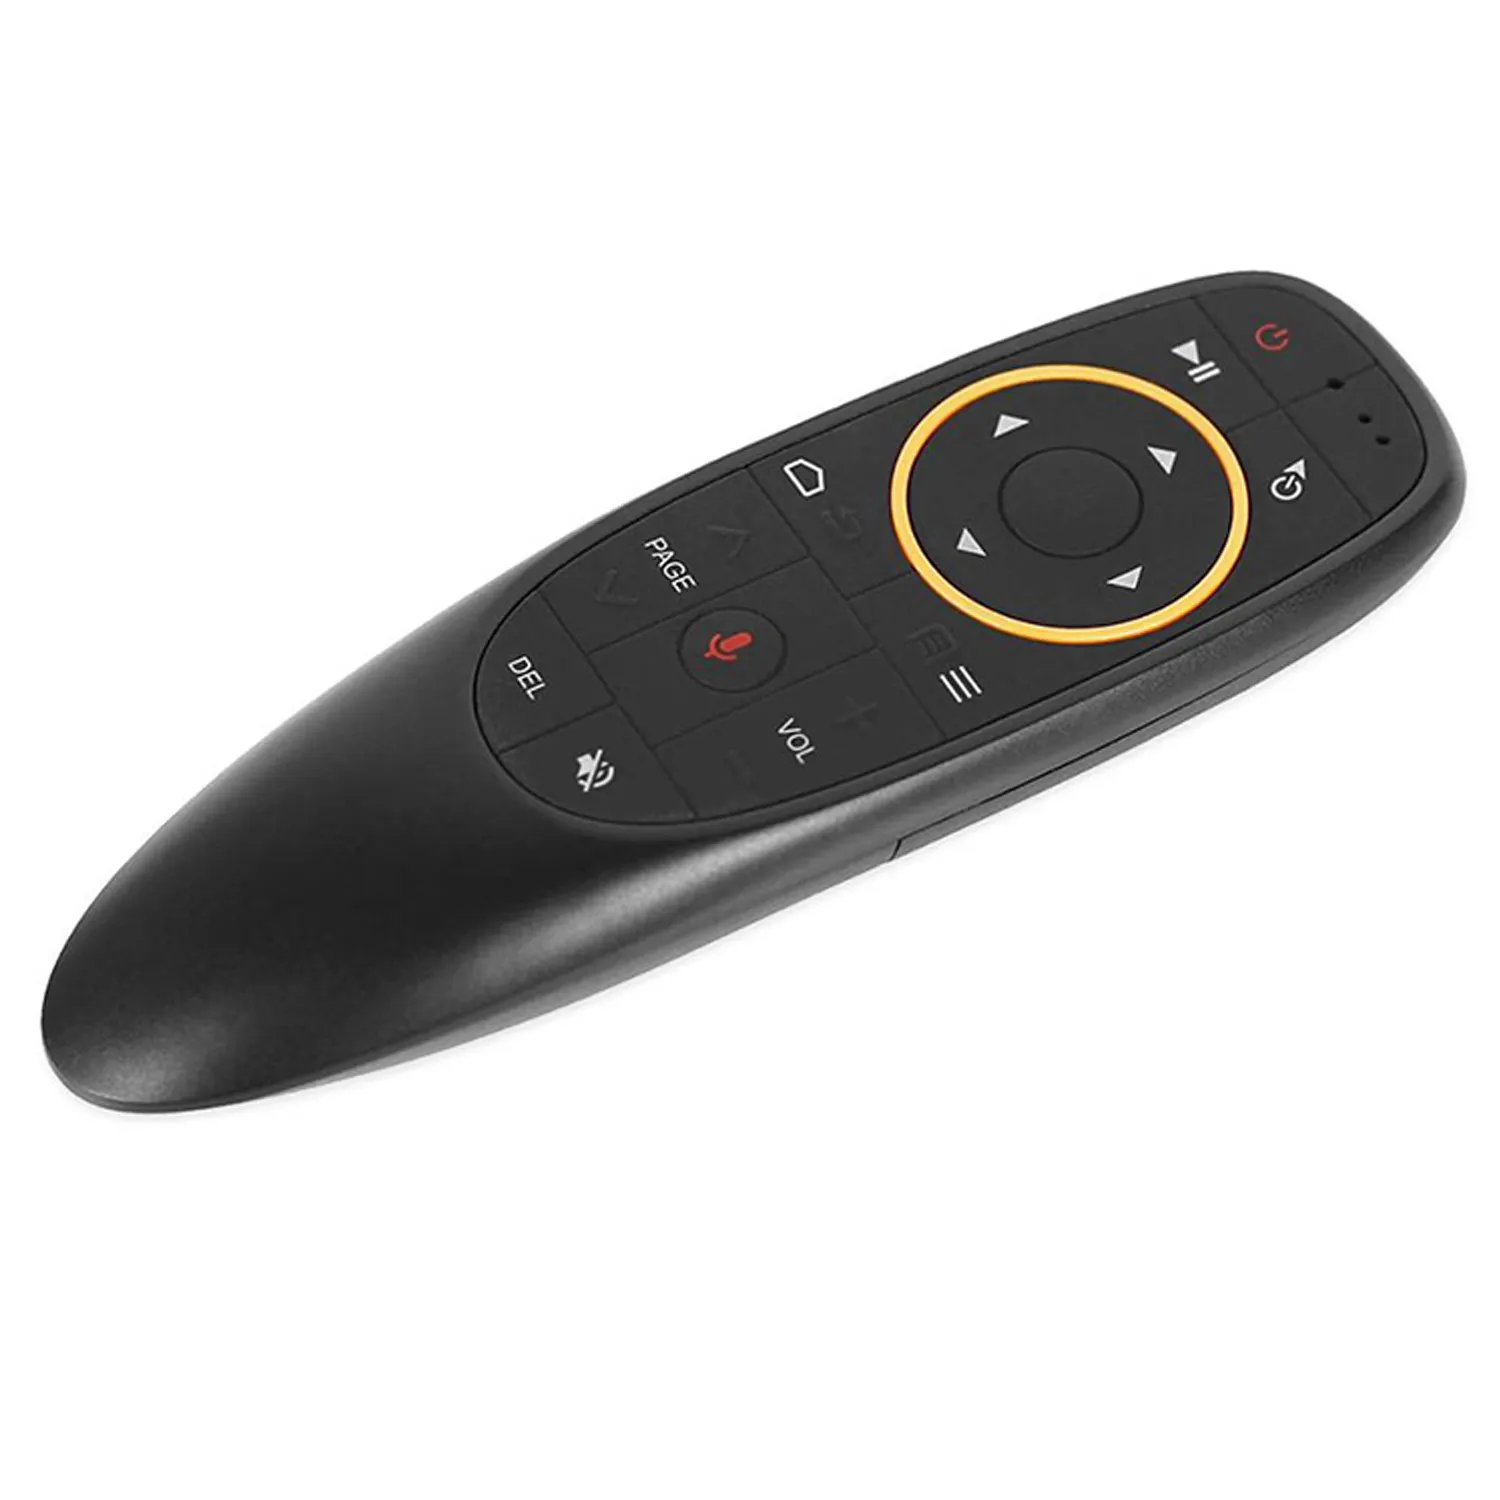 2.4 G Wireless Air Mouse 10 Meters Usage Range ABS Material 17 keys, Support For Voice Flying Mouse Remote Control